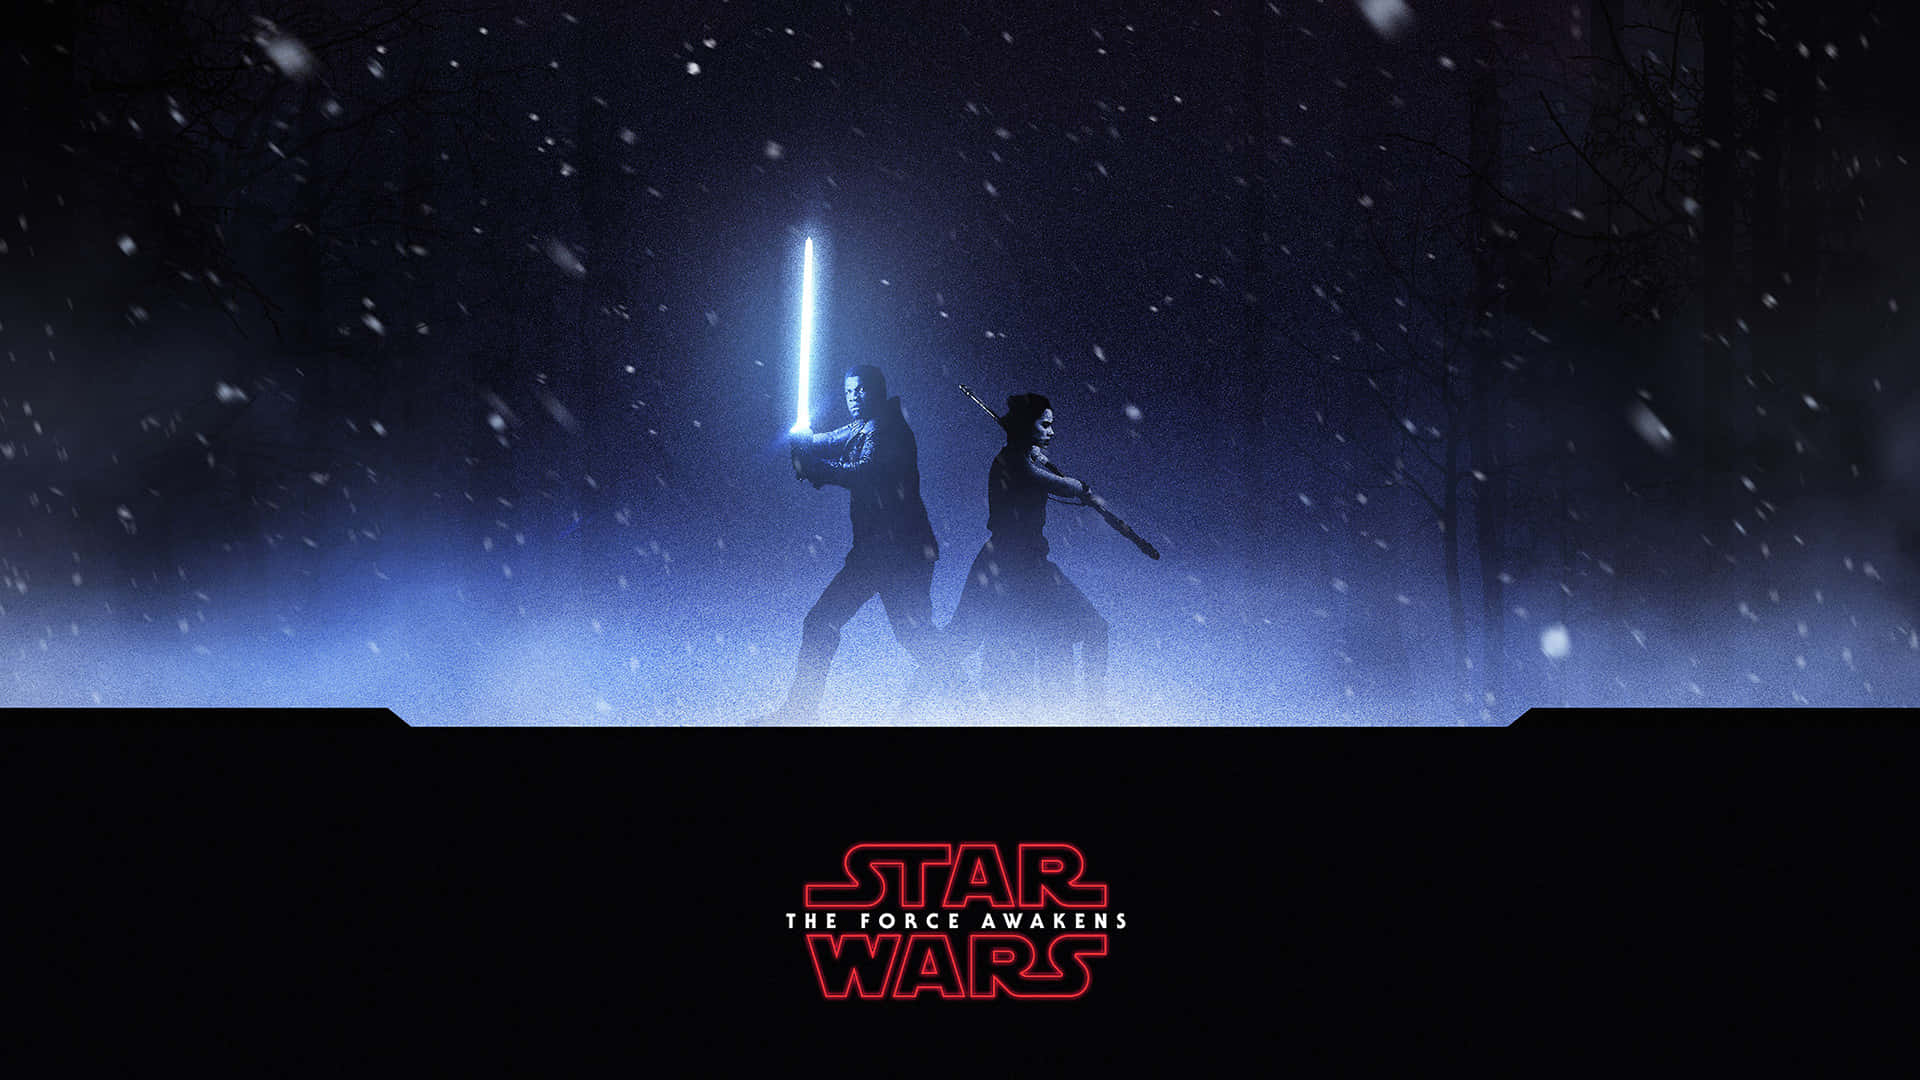 Pablo and Alex take part in an epic lightsaber duel on Dagobah Wallpaper